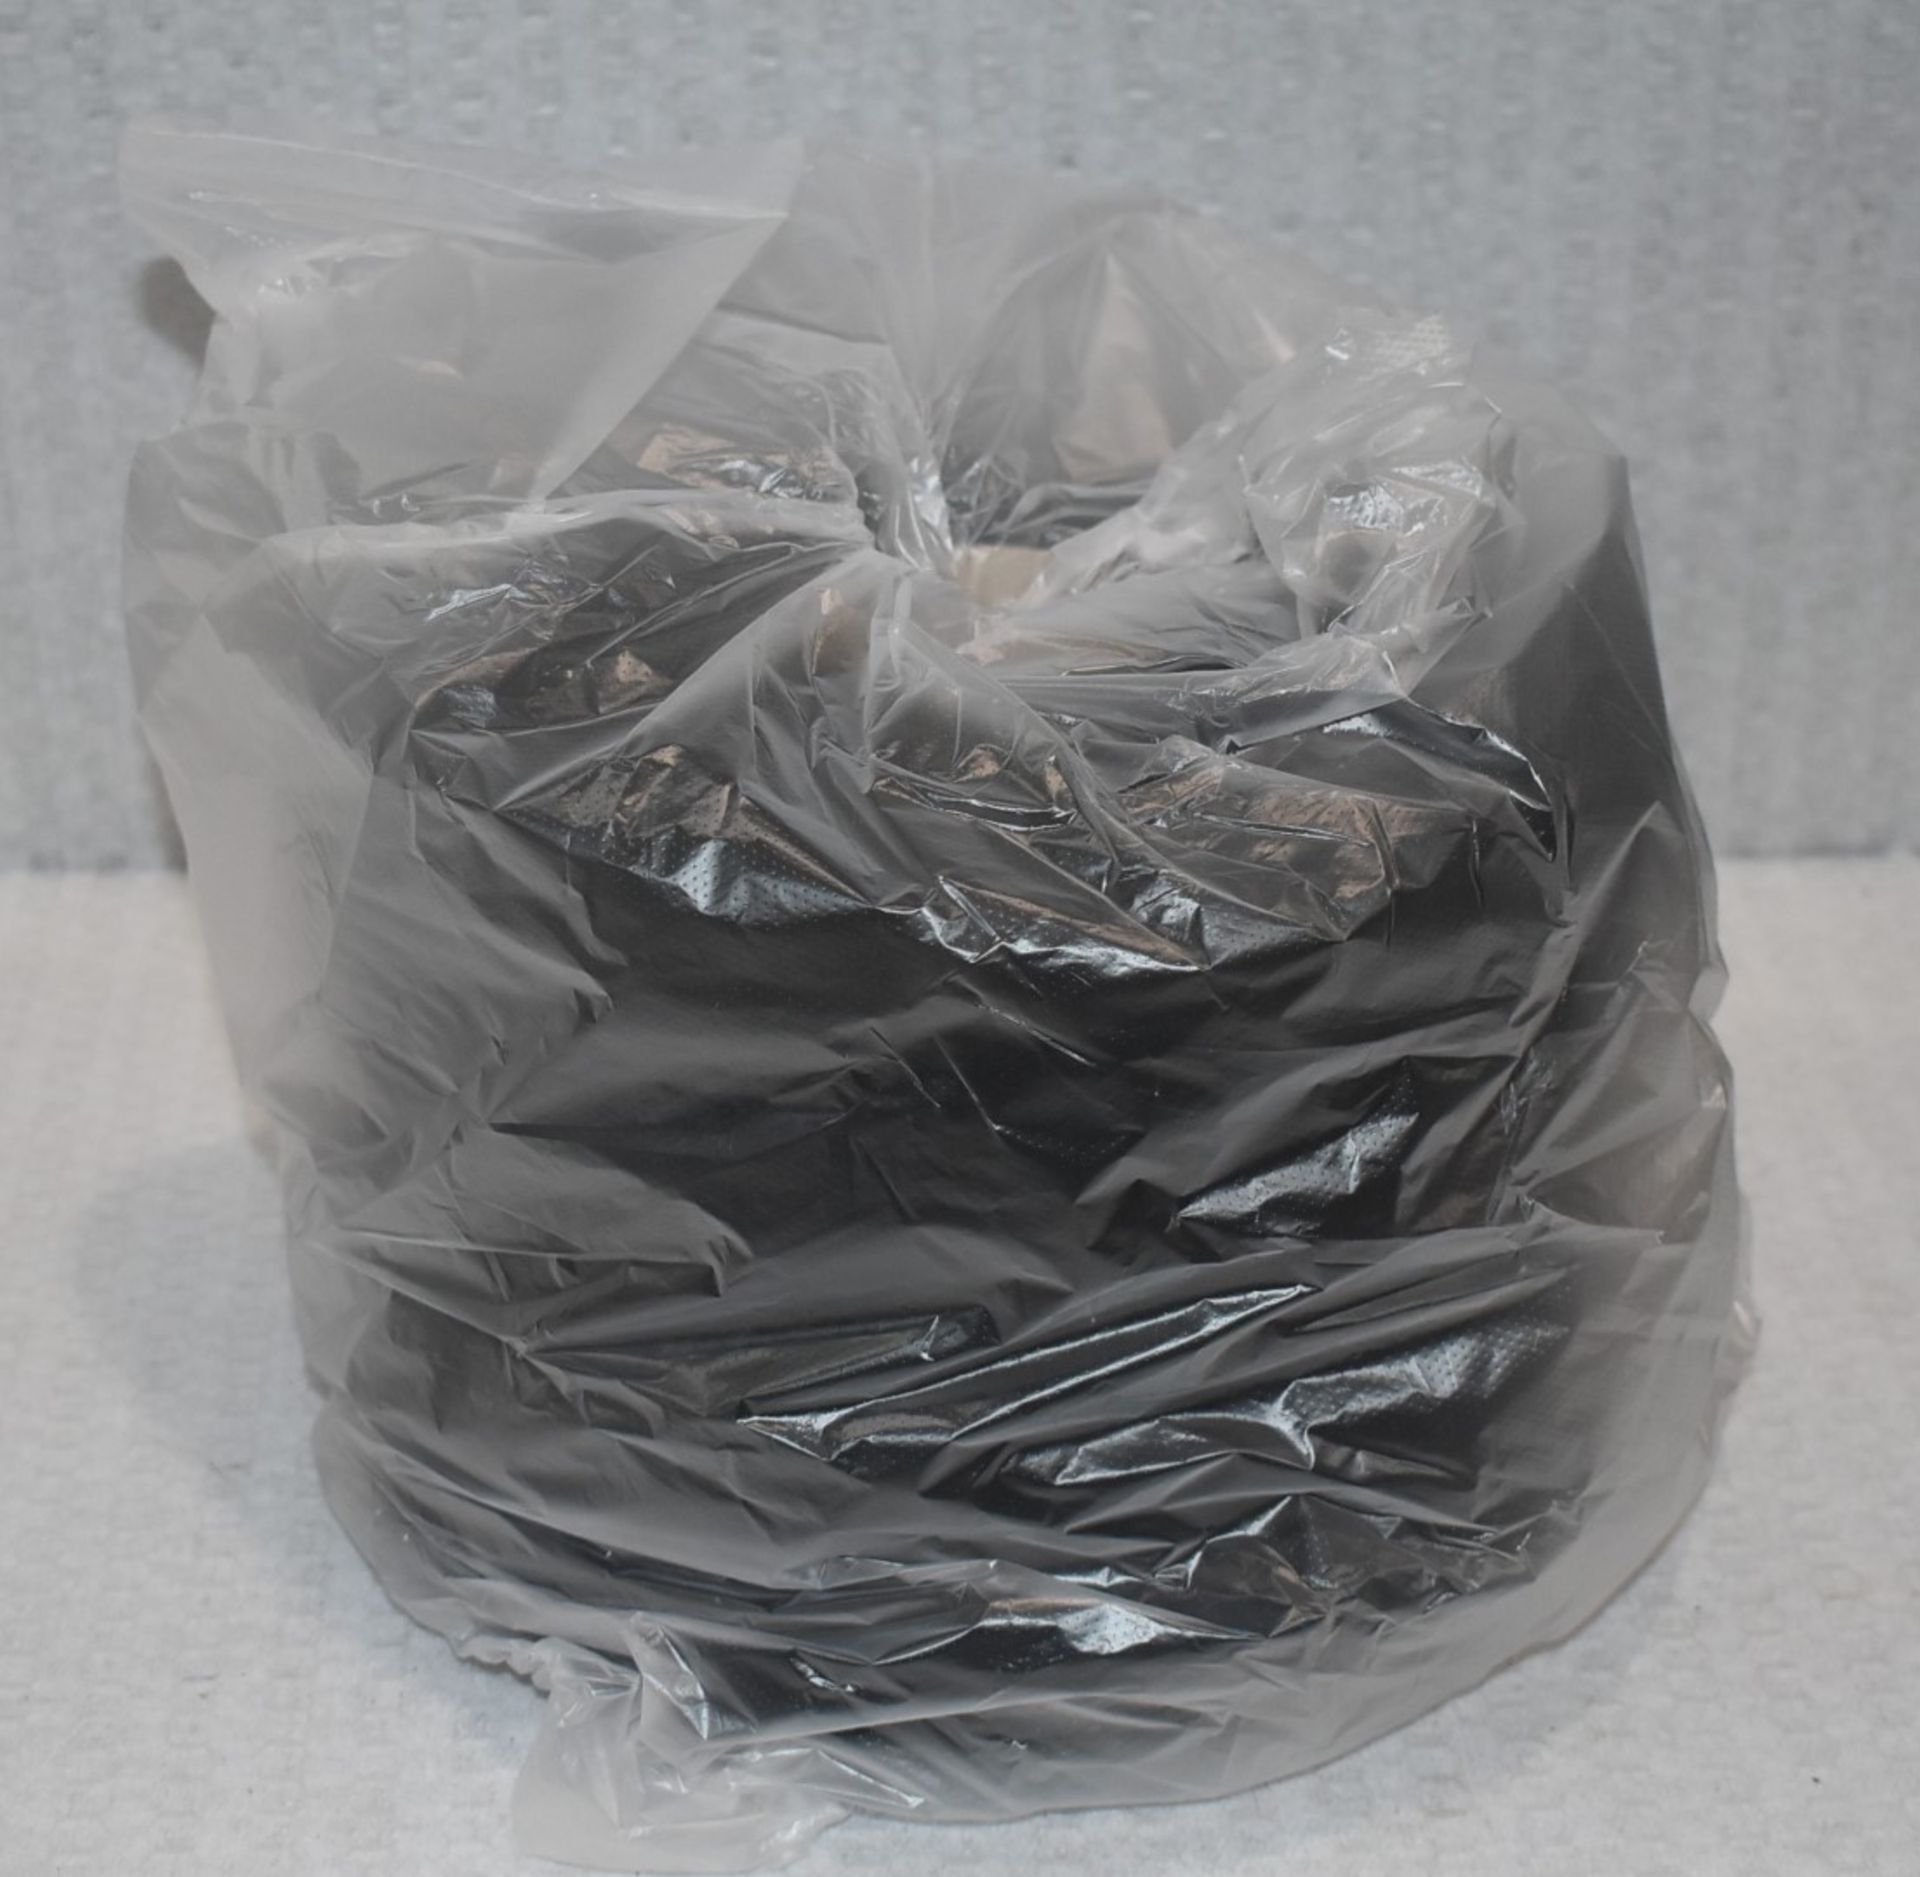 36 x Cones of 1/7,5 Lagona Knitting Yarn - Charcoal - Approx Weight: 2,300g - New Stock ABL Yarn - Image 5 of 11